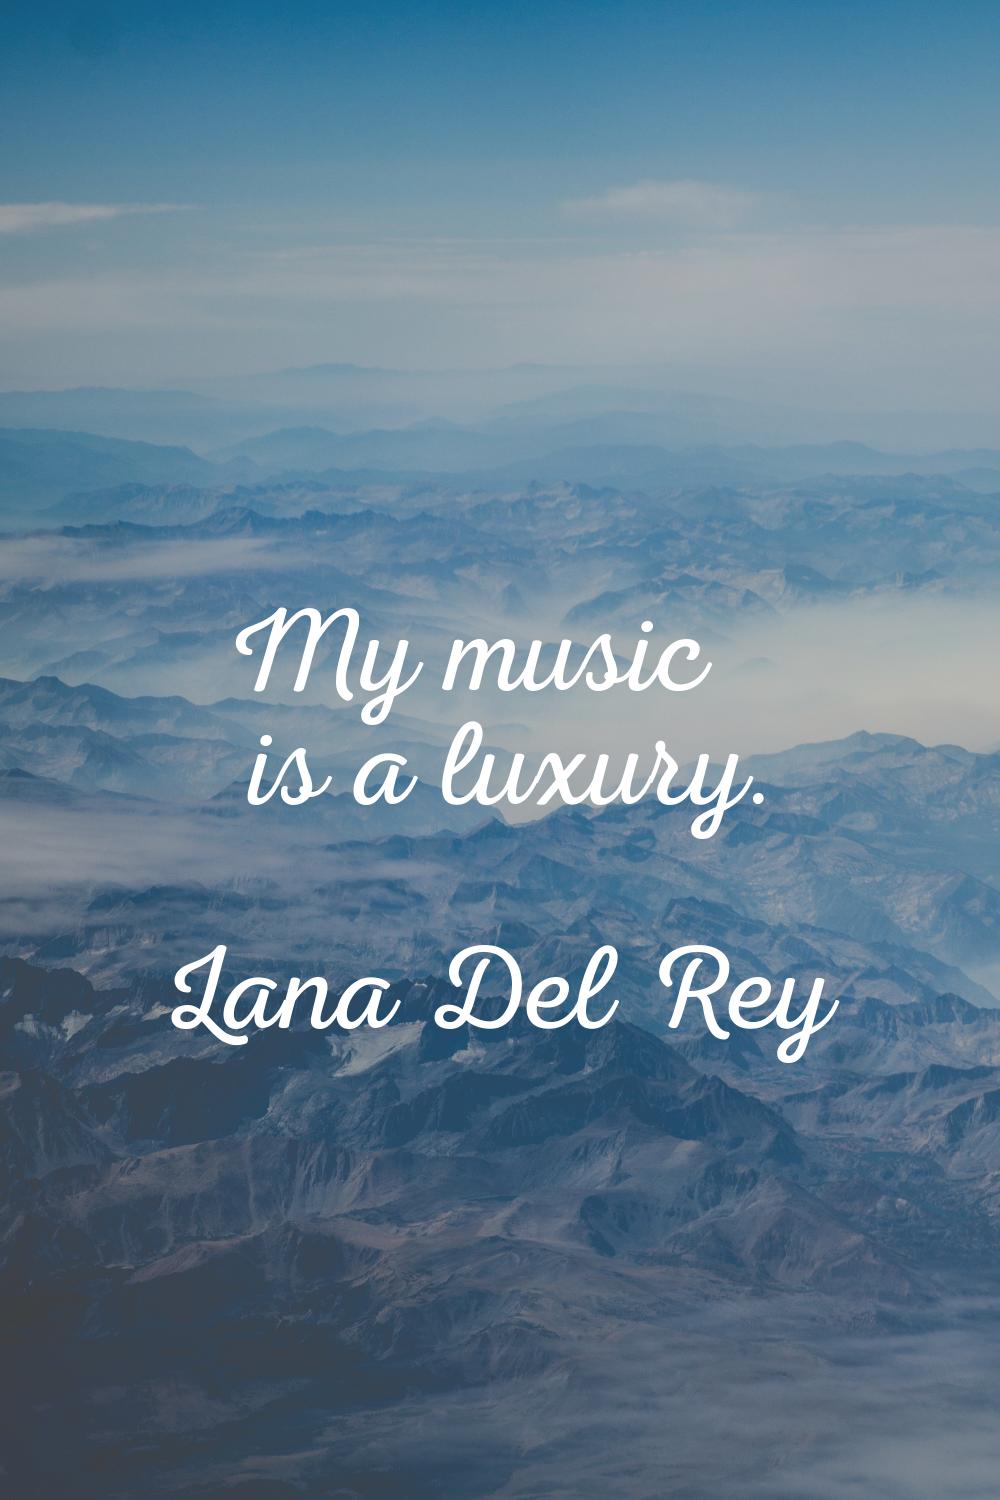 My music is a luxury.